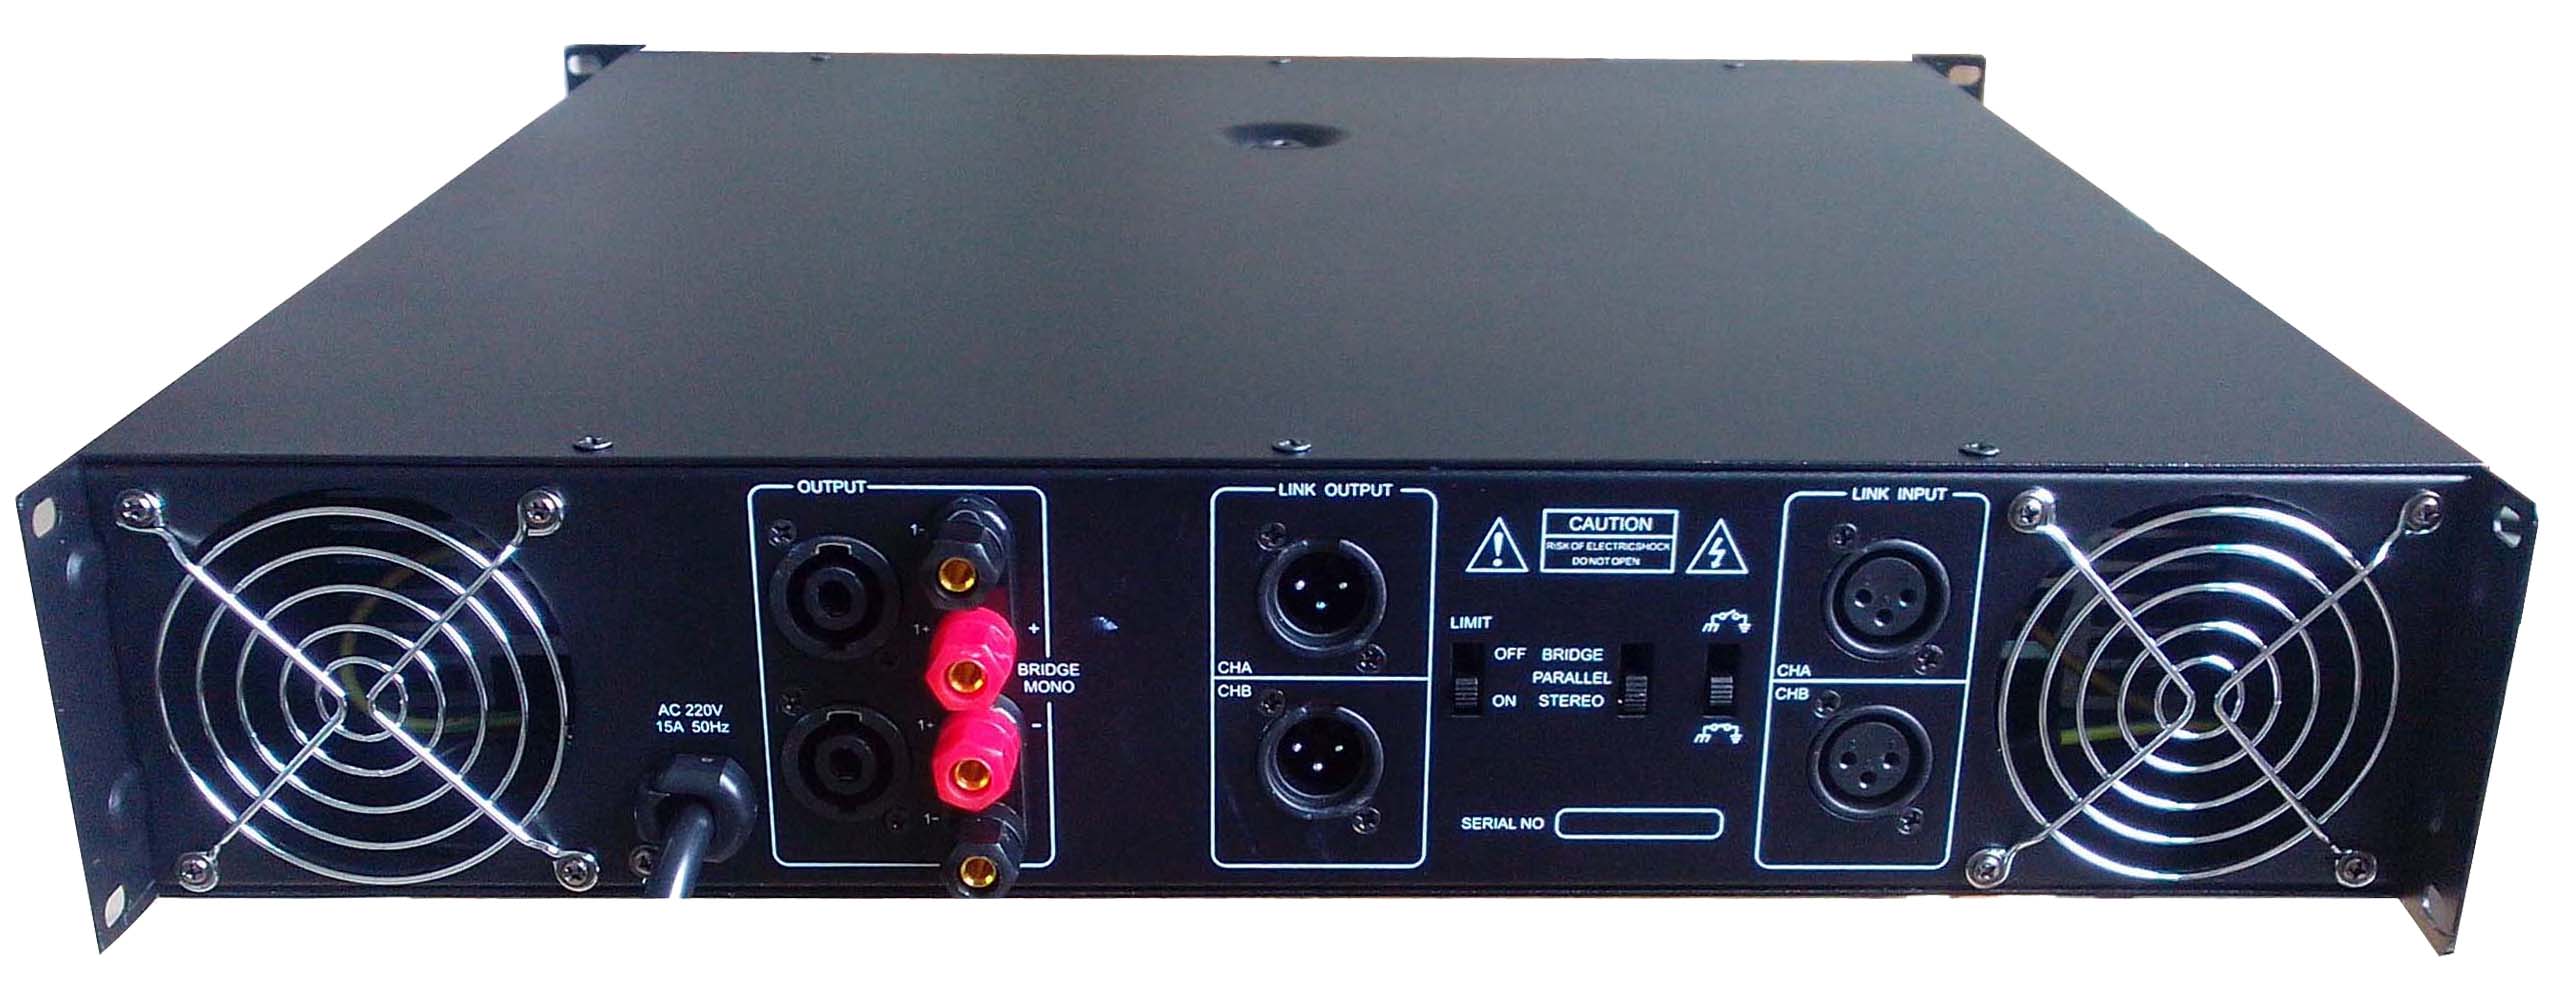 F1000 2 CH Professional Mosfet Power Amplifier